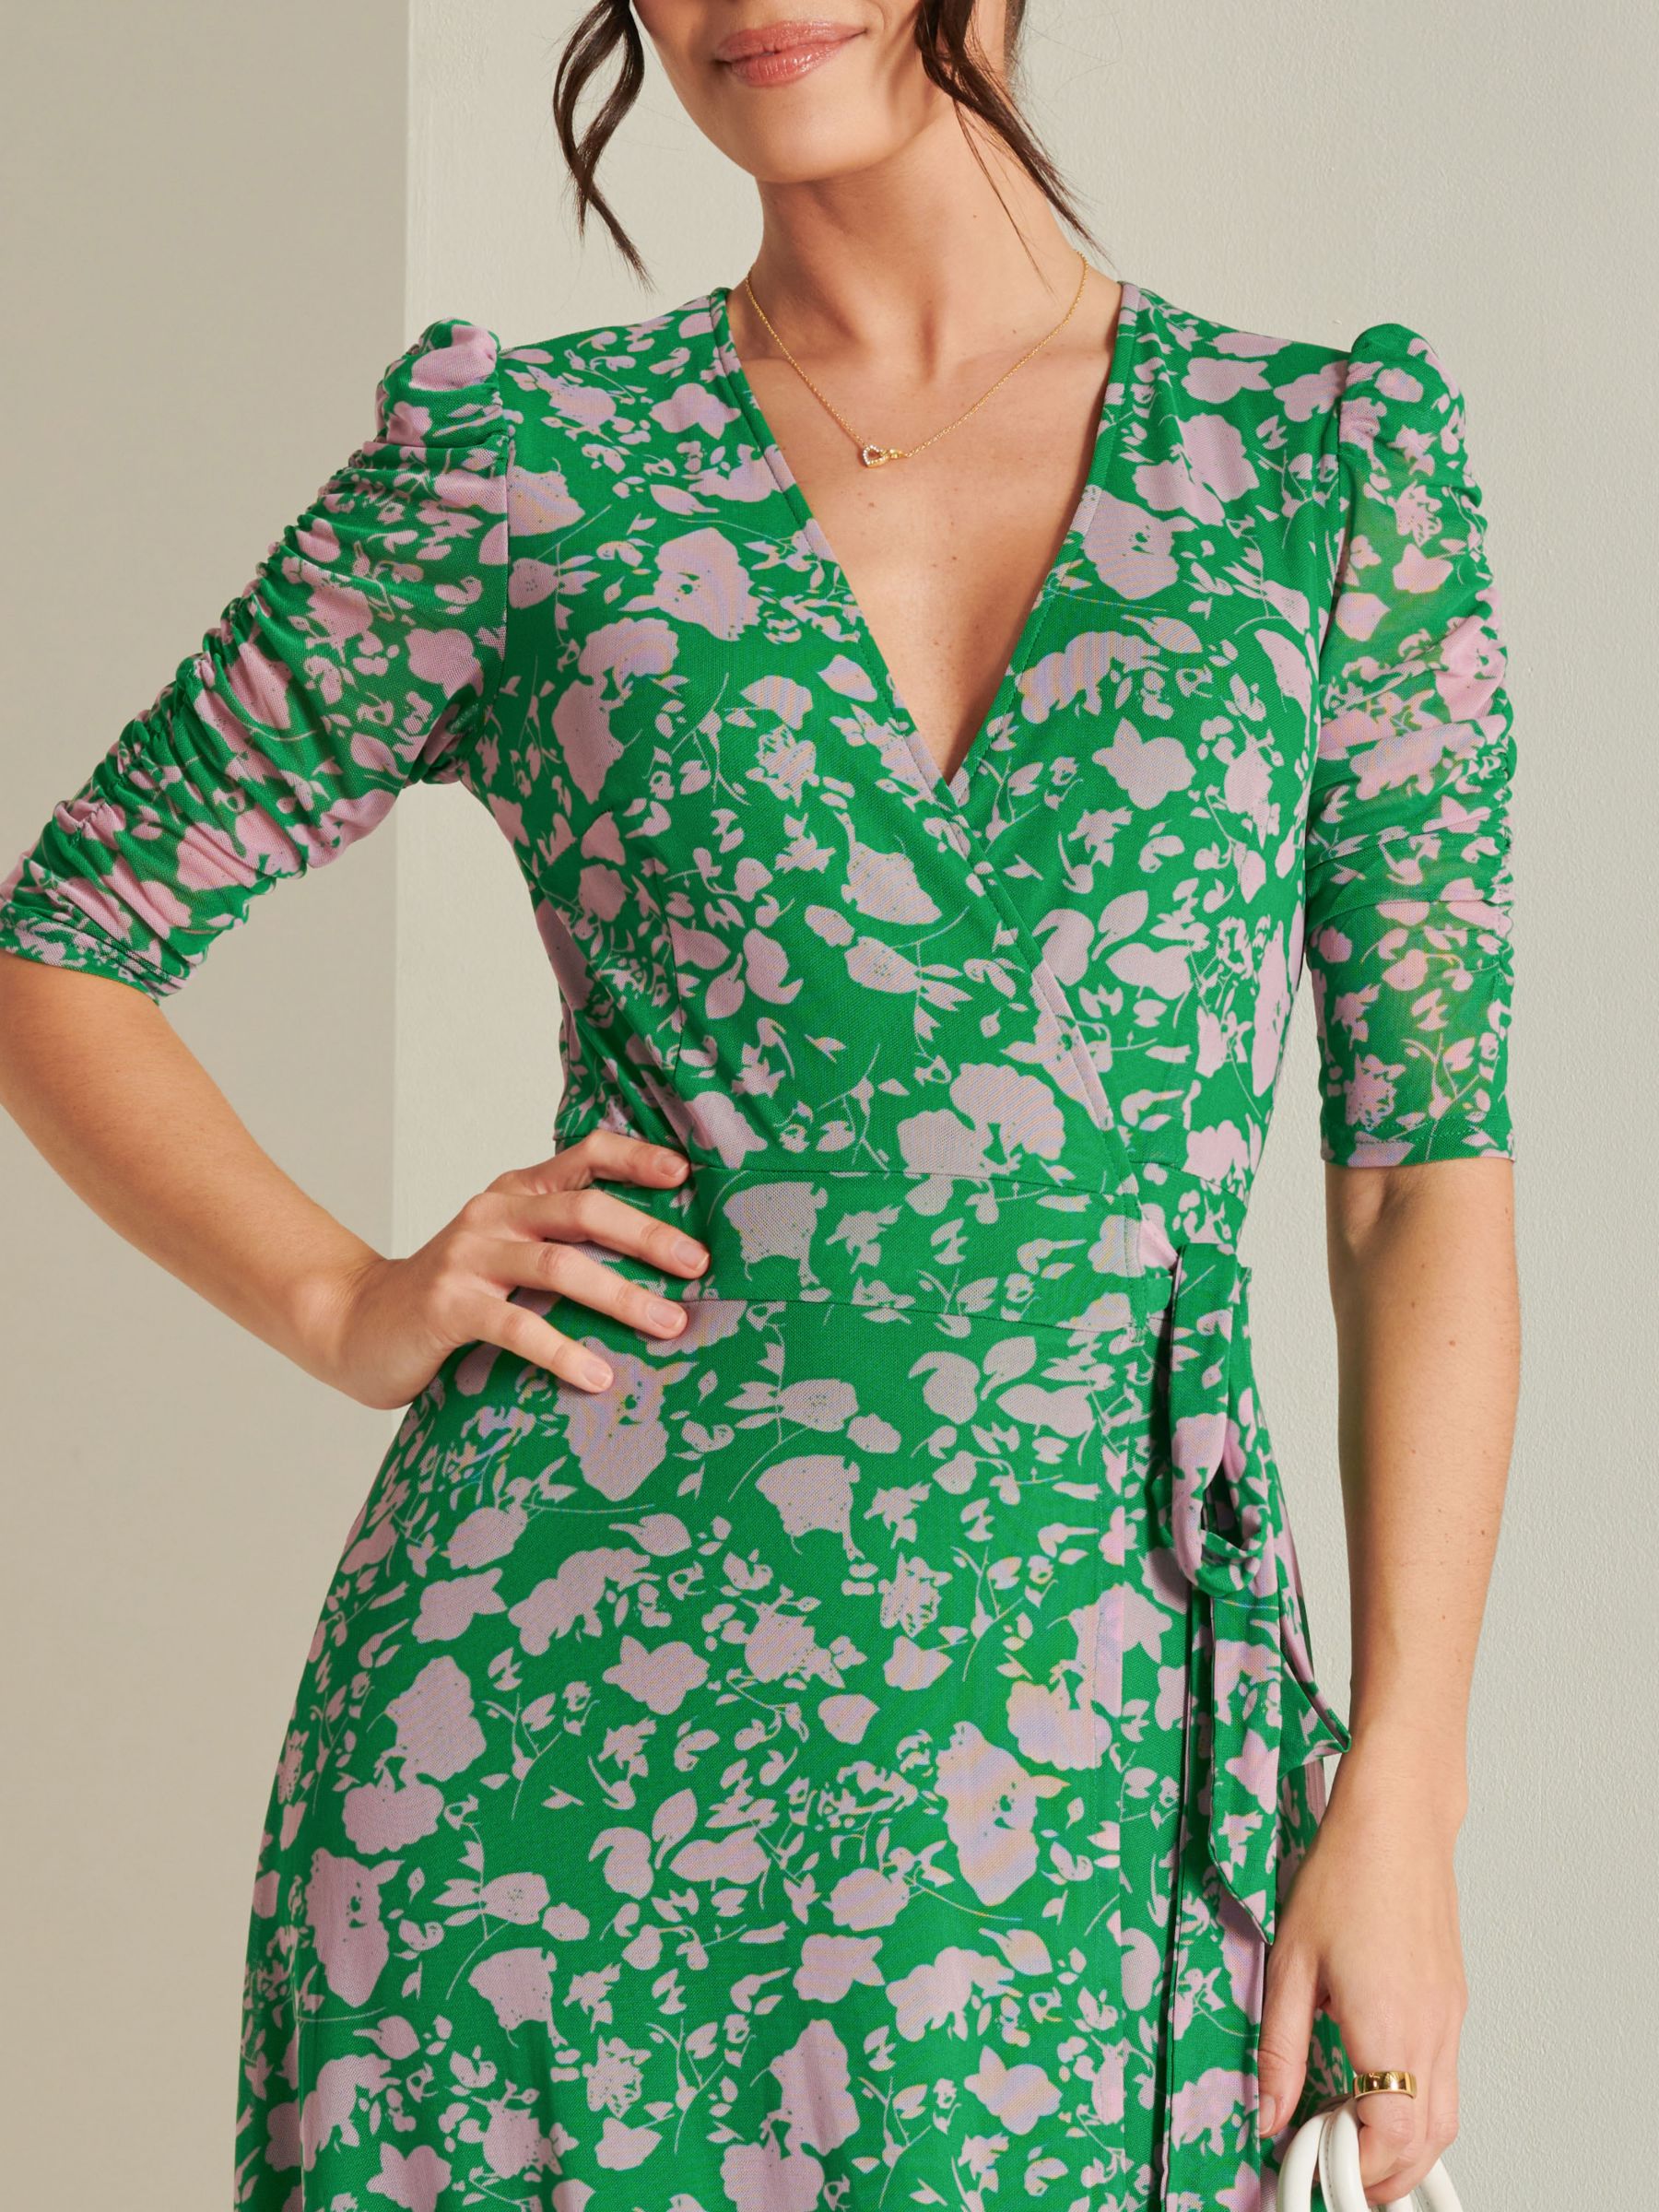 Buy Jolie Moi Wrapped Mesh Maxi Dress, Green Floral Online at johnlewis.com